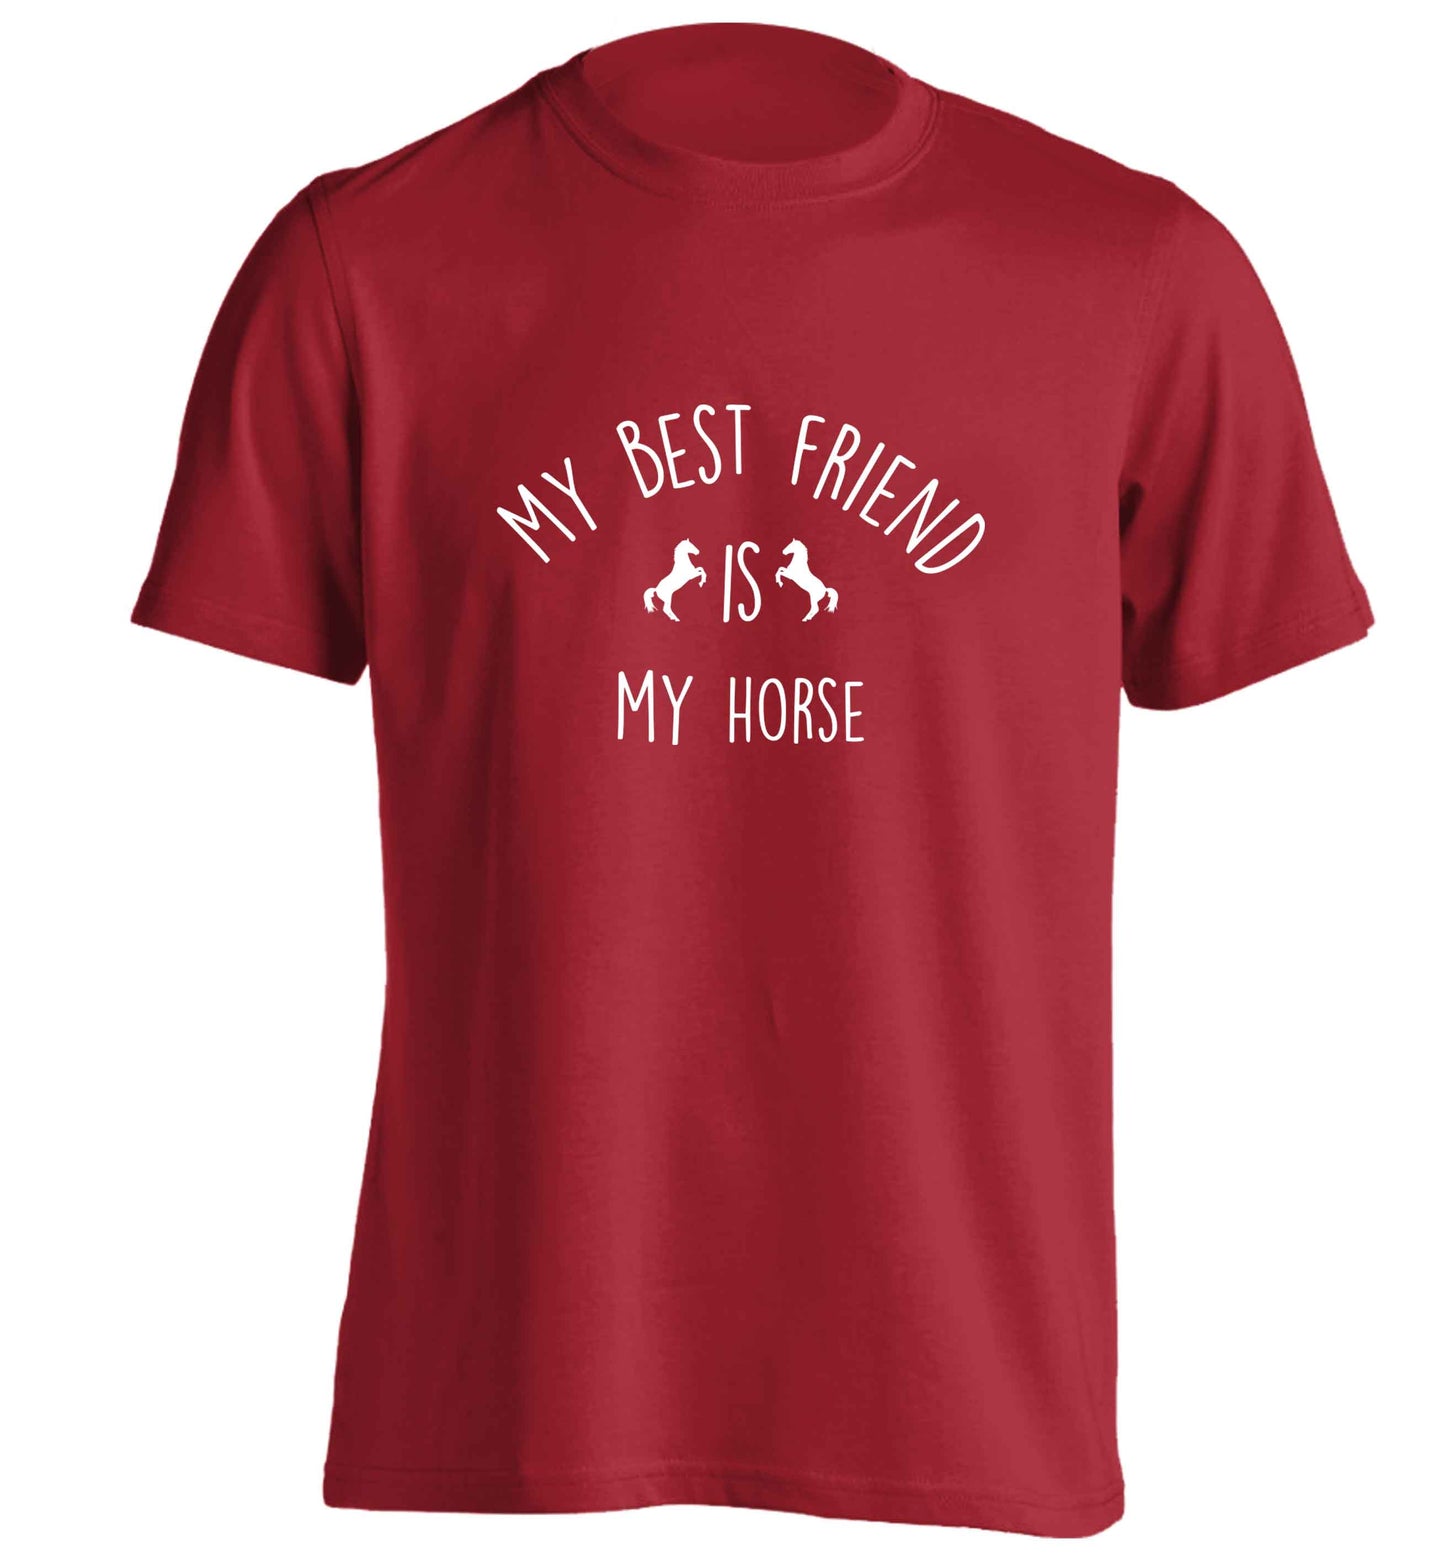 My best friend is my horse adults unisex red Tshirt 2XL